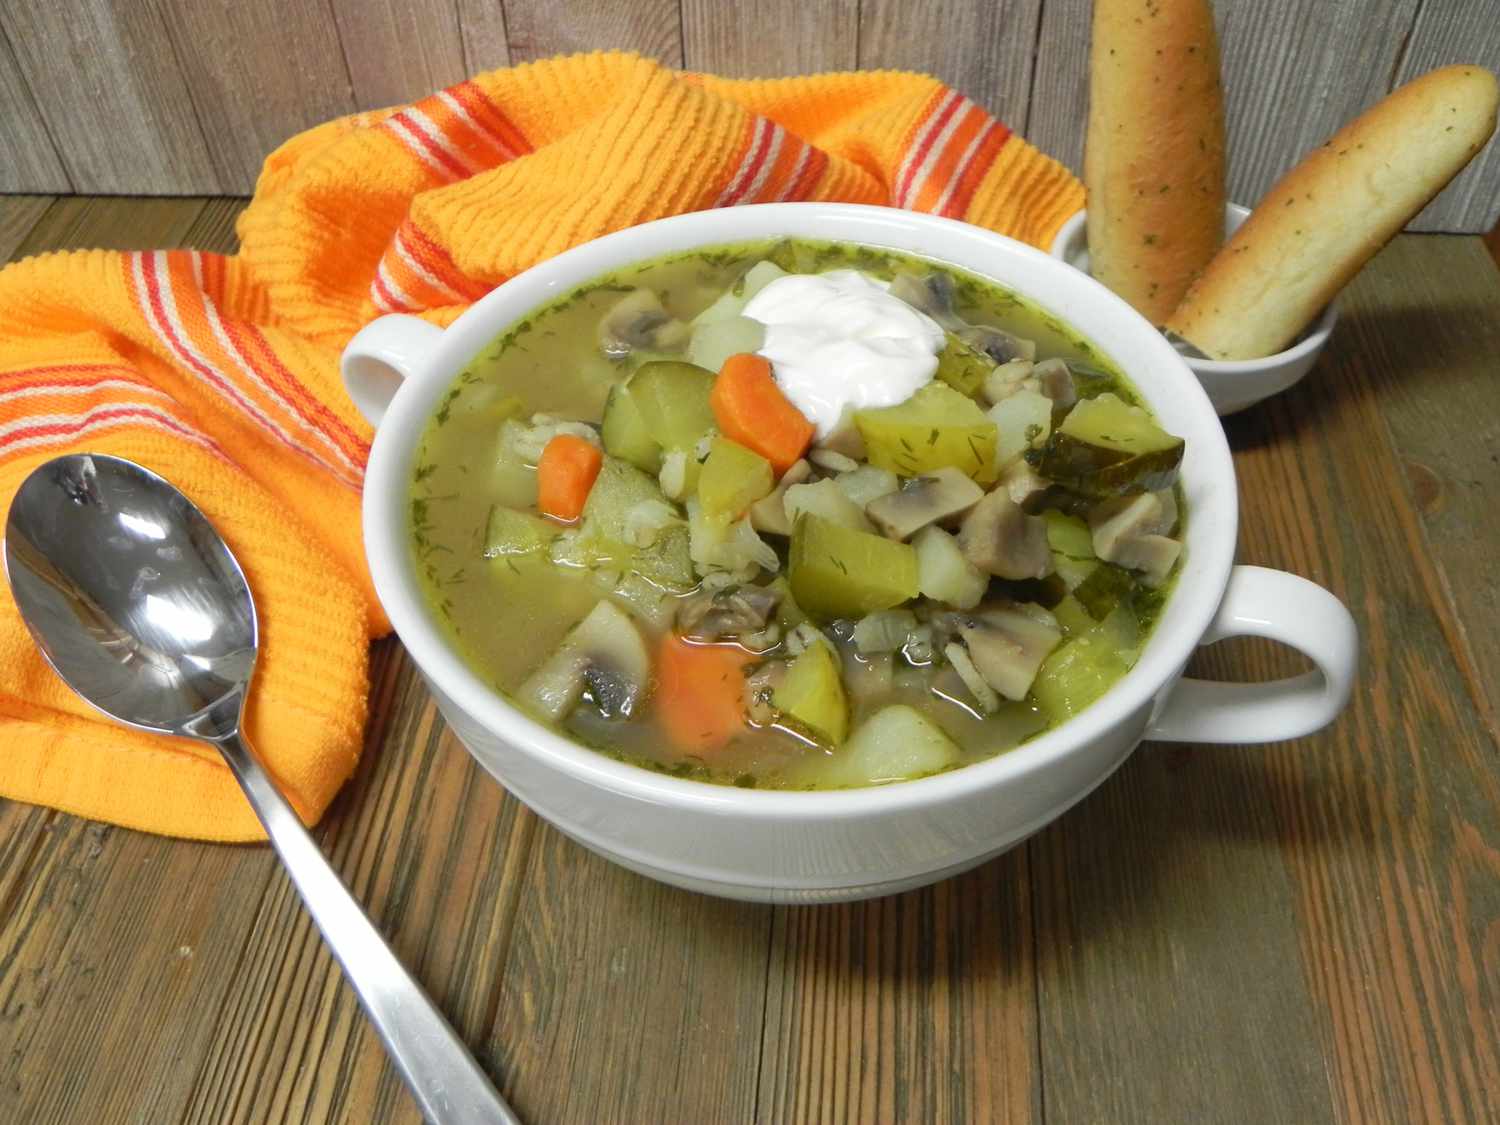 Russian-barley-and-pickle-soup in bowl with bread and orange napkin